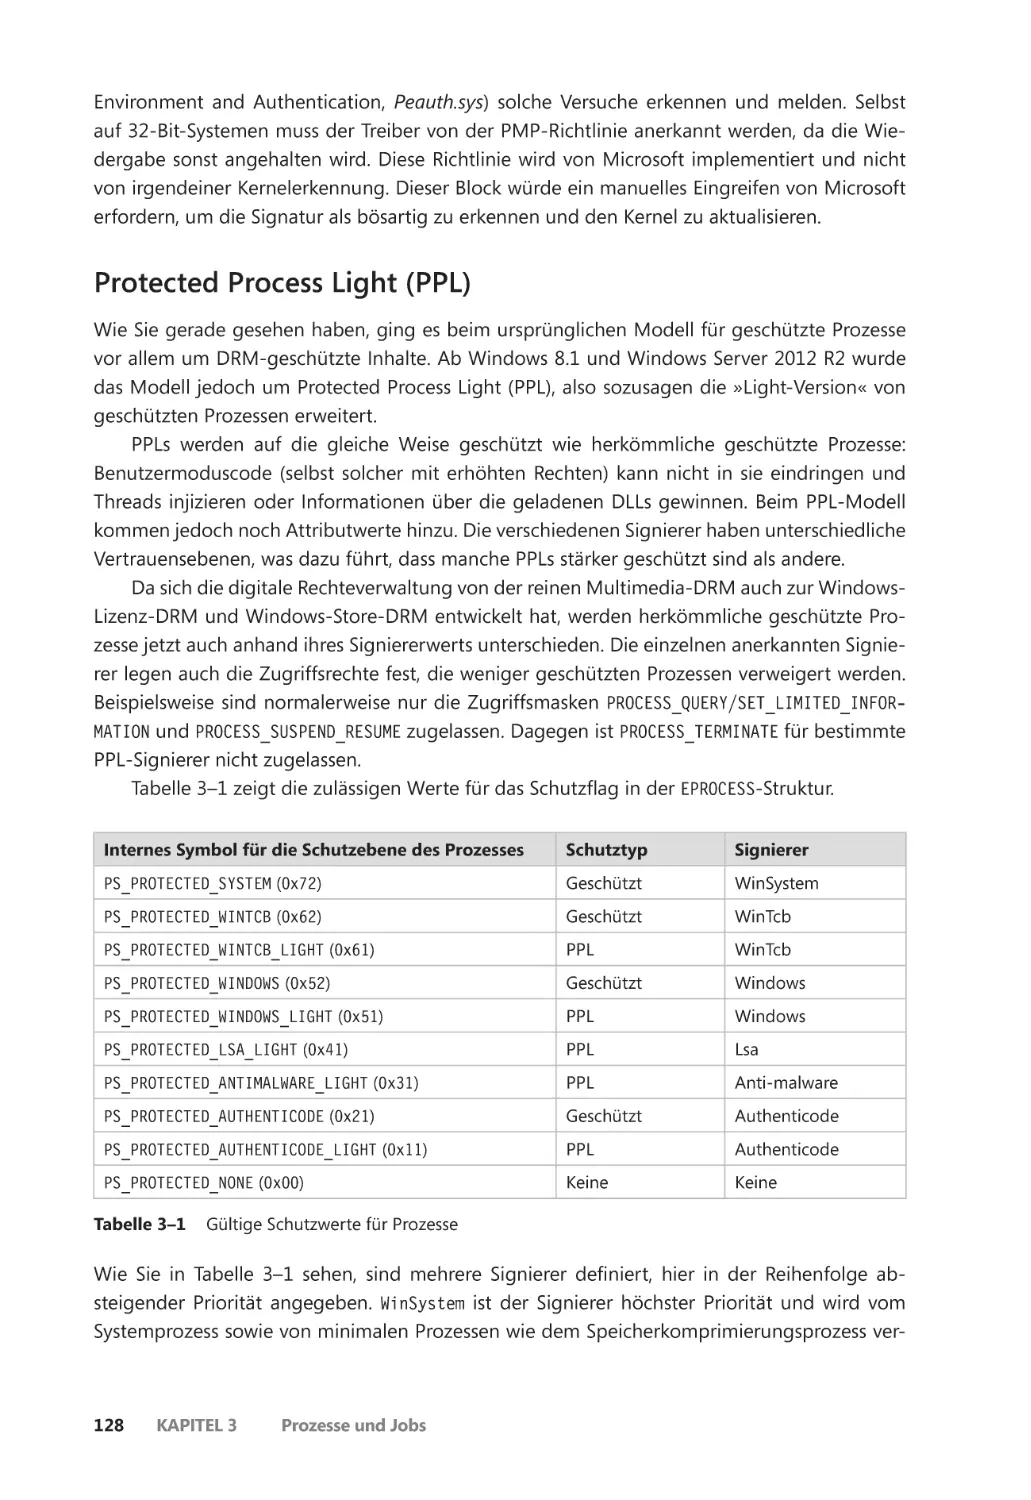 Protected Process Light (PPL)